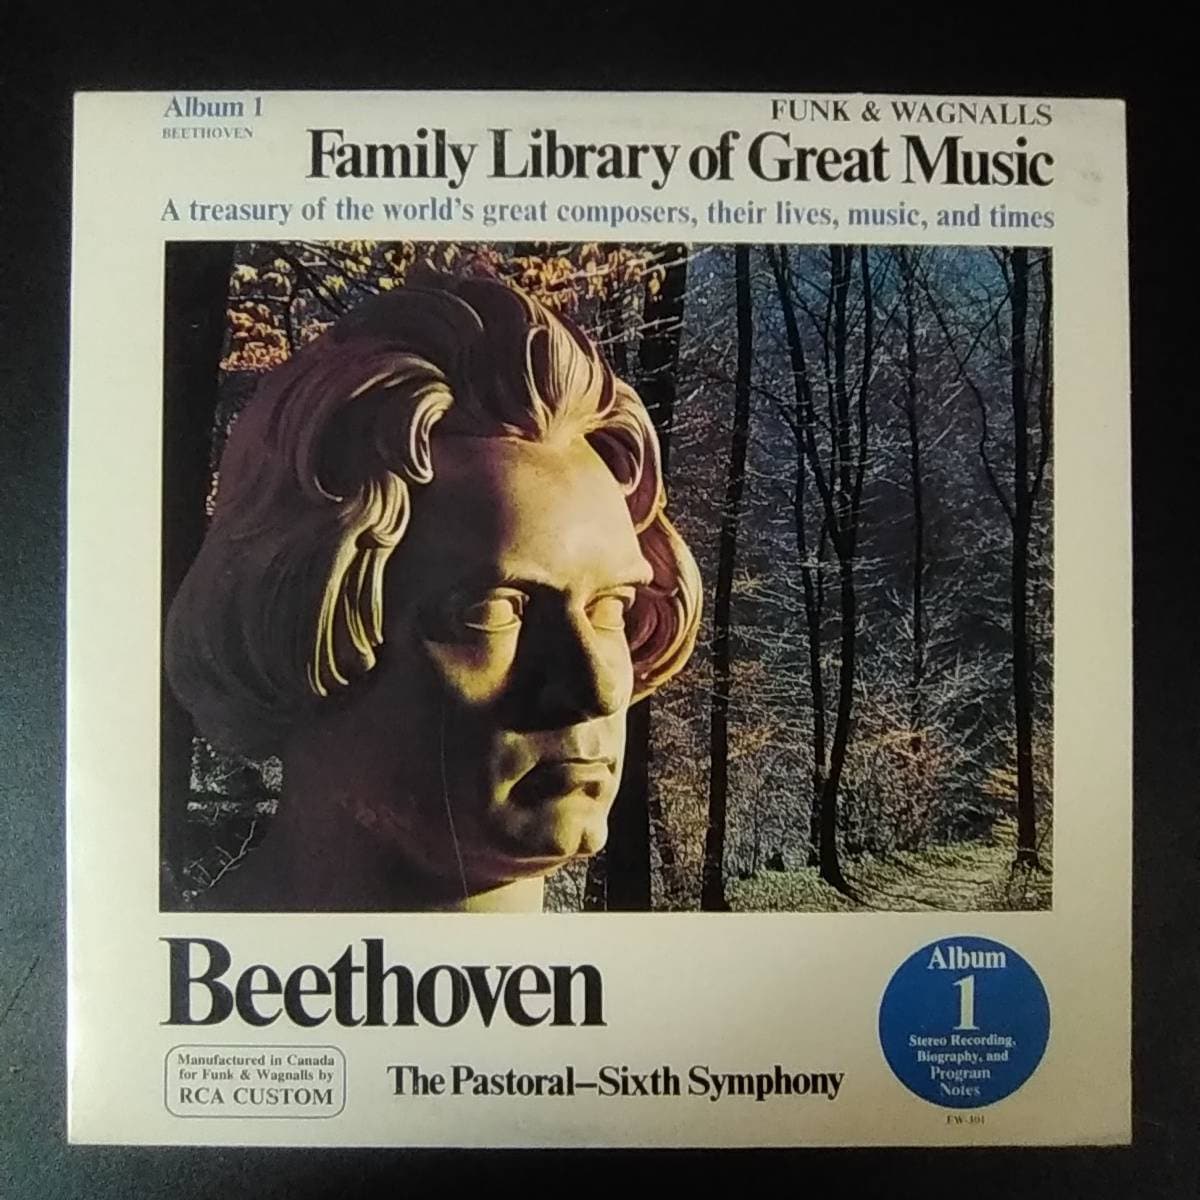 @deeplyclassical @aquilanebula The Funk and Wagnall's Beethoven 6th was the first LP I ever bought as a kid at @meijer.